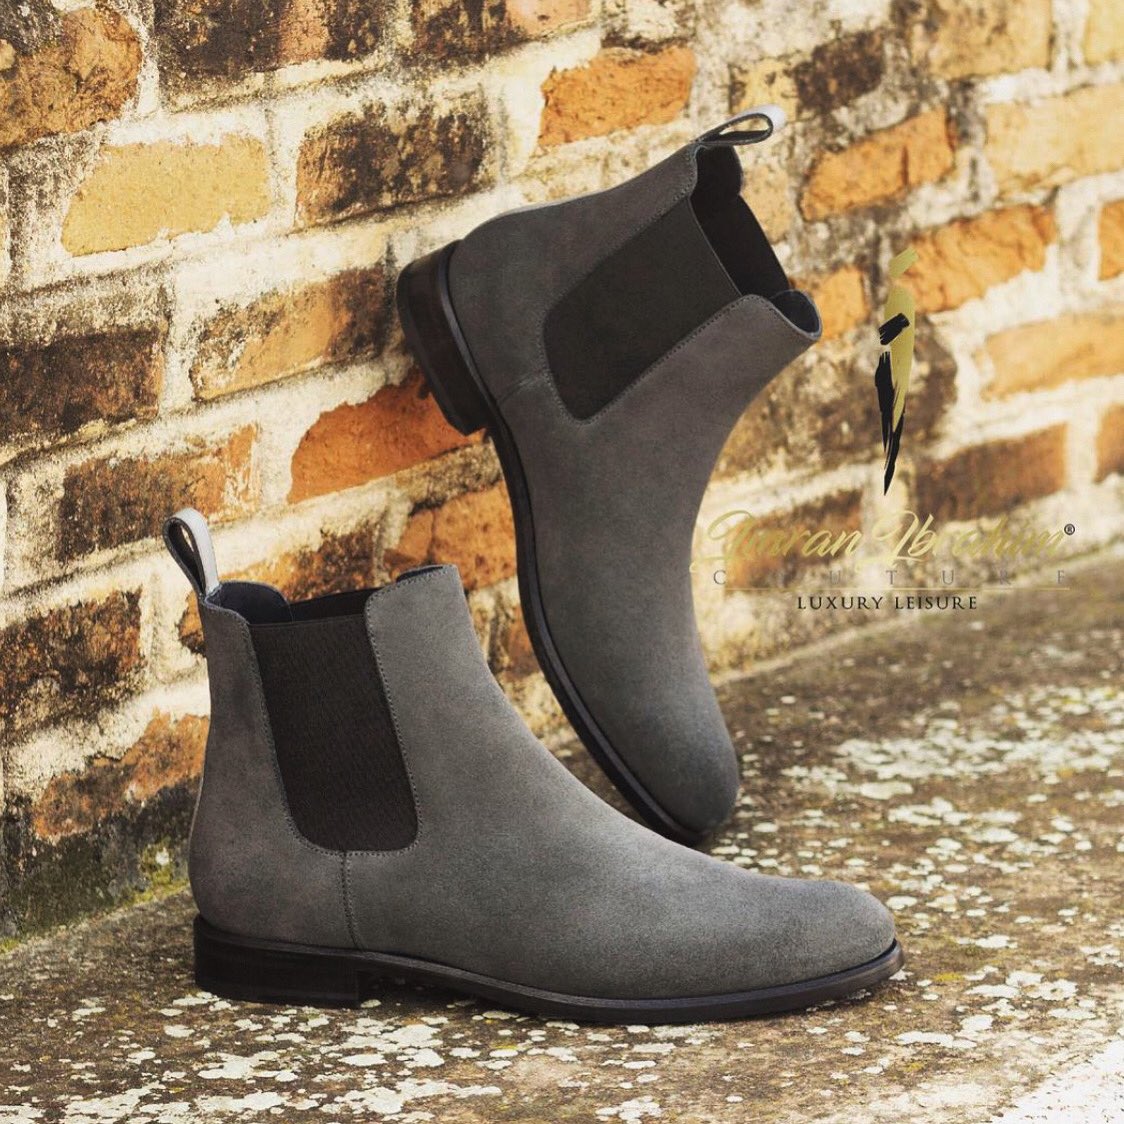 Elevate your wardrobe with our Women’s Pewter Suede Chelsea Boots

#IMRANIBRAHIMCOUTURE

imranibrahimcouture.com/product-page/w…

#thursday #blackpoundday #opulencetailoring #boots #bootsforsale #shoesaddict #bootaddict #bootsstyle #shoselfie #bootsaddicts #chelseabootswomen #chelseabootslover